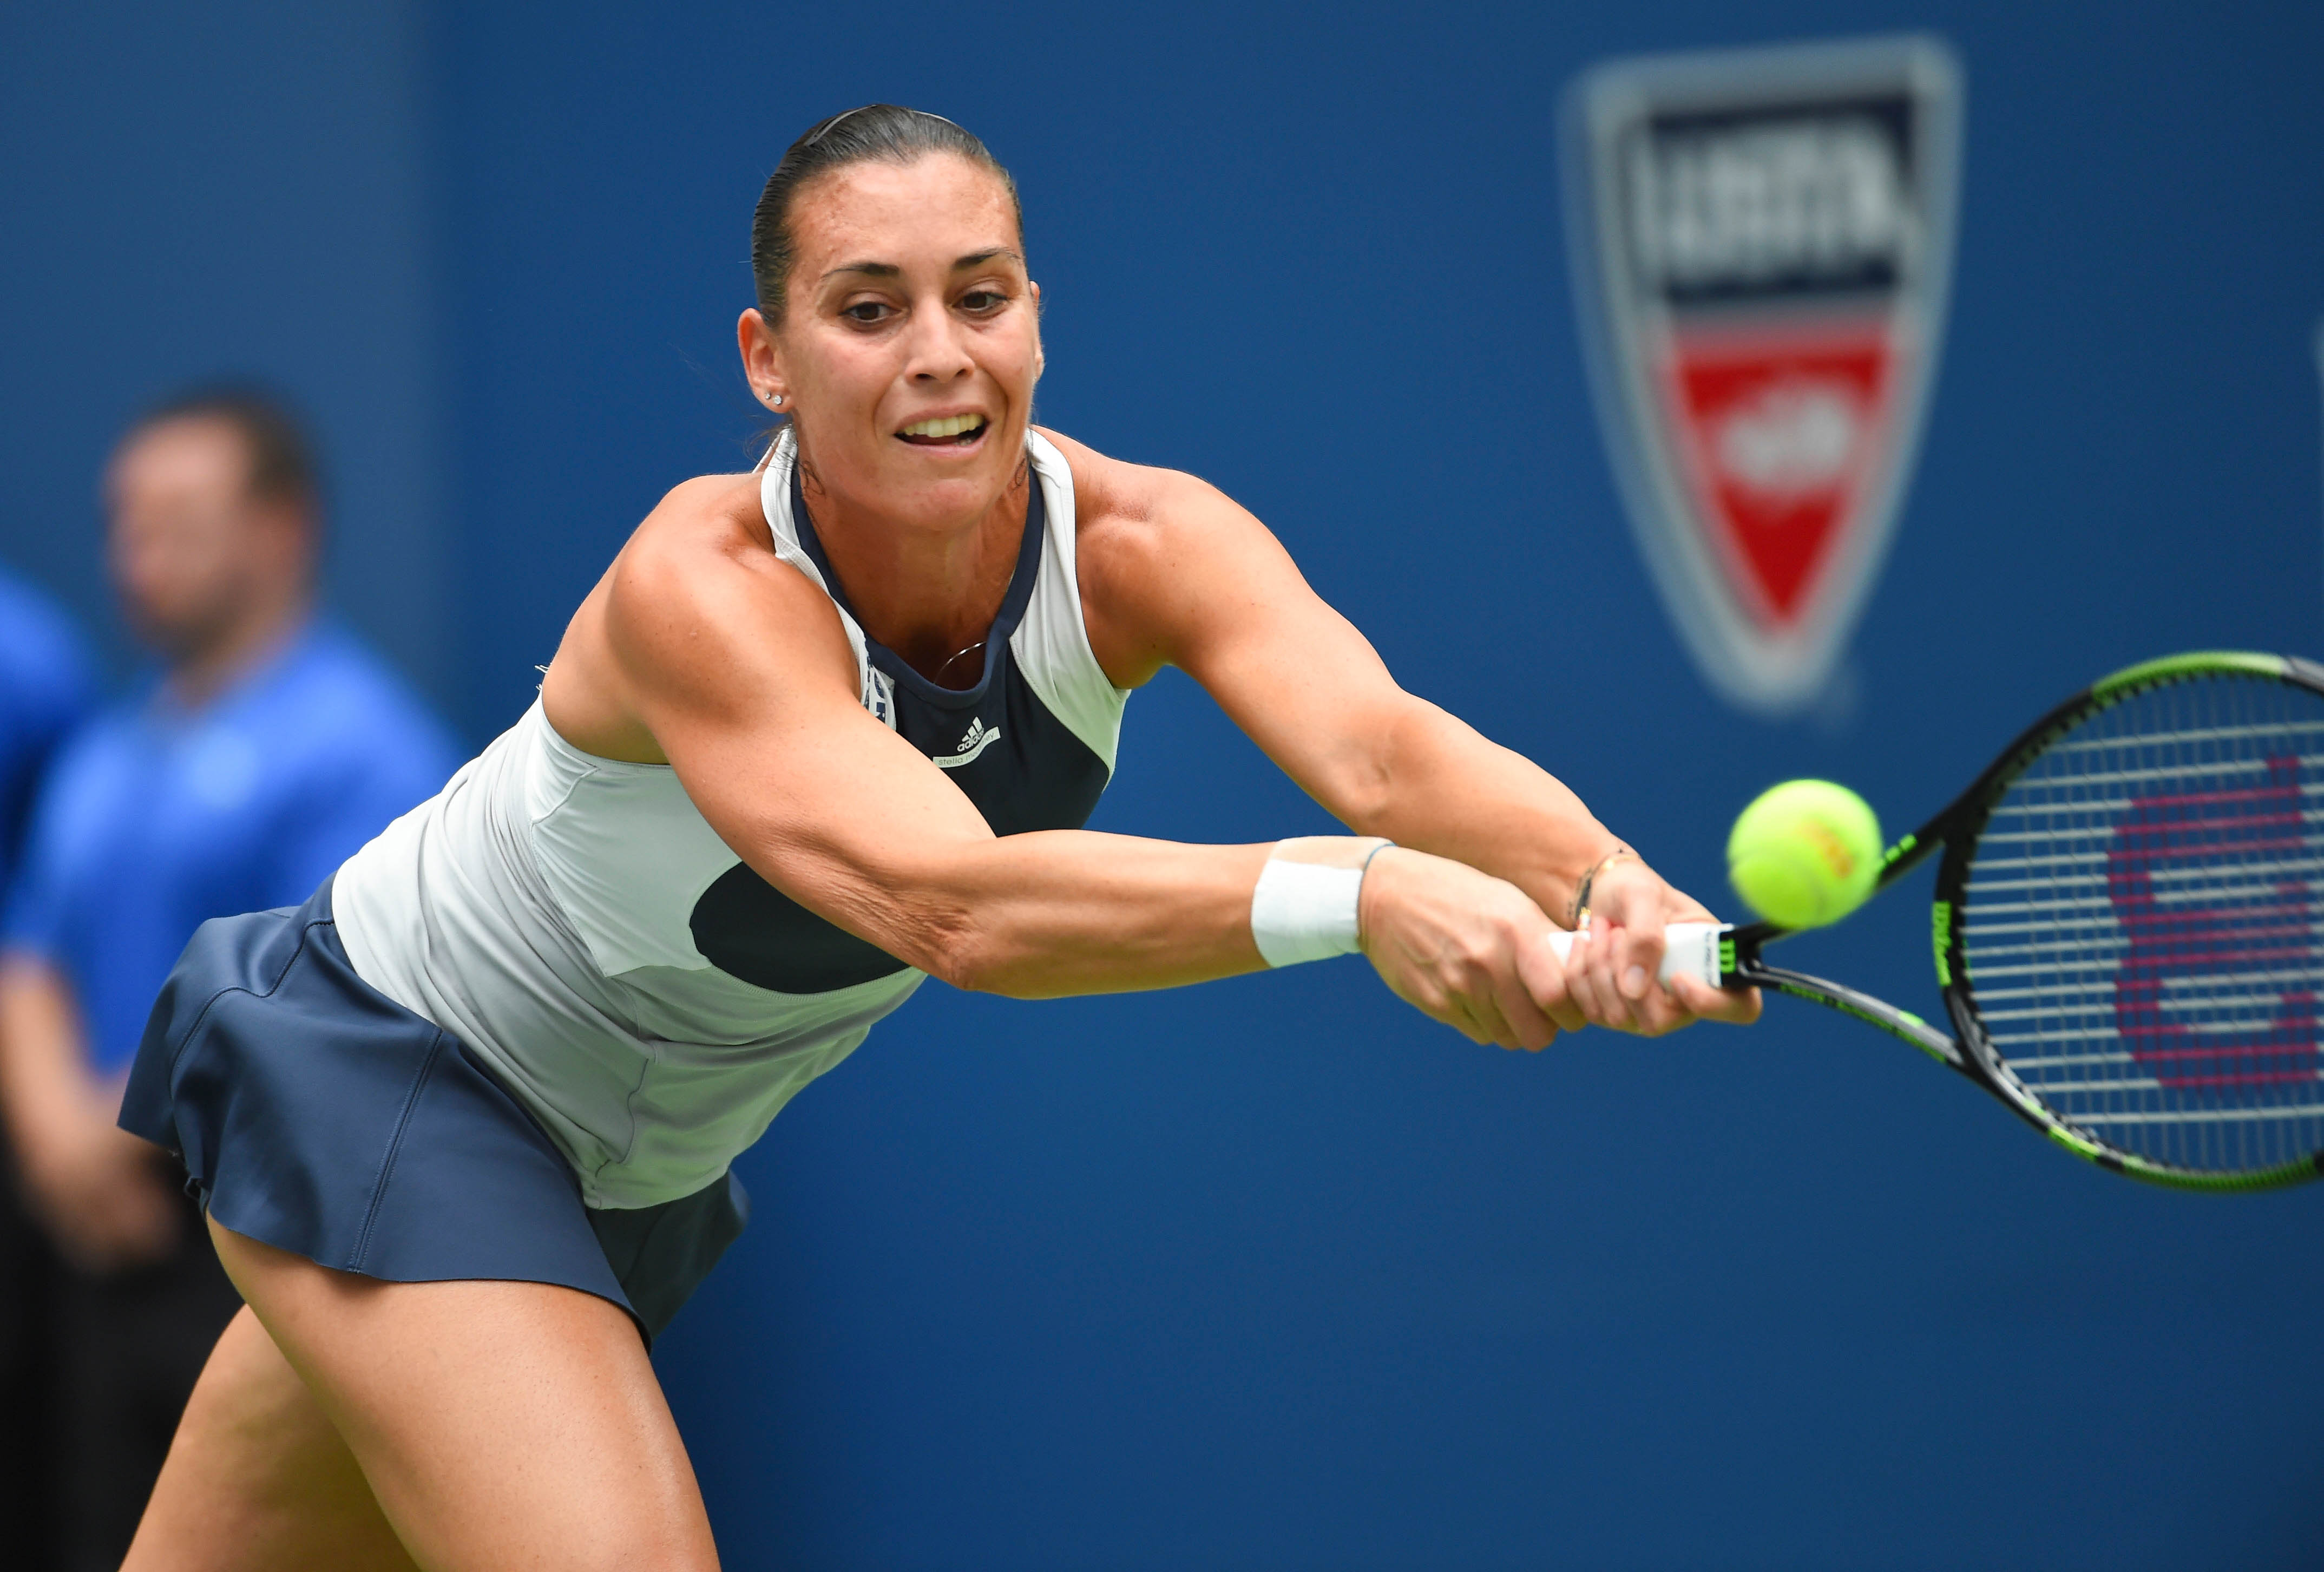 Sep 12, 2015; New York, NY, USA; Flavia Pennetta of Italy hits to Roberta Vinci of Italy in the Women's Singles Final on day thirteen of the 2015 U.S. Open tennis tournament at USTA Billie Jean King National Tennis Center. Mandatory Credit: Robert Deutsch-USA TODAY Sports